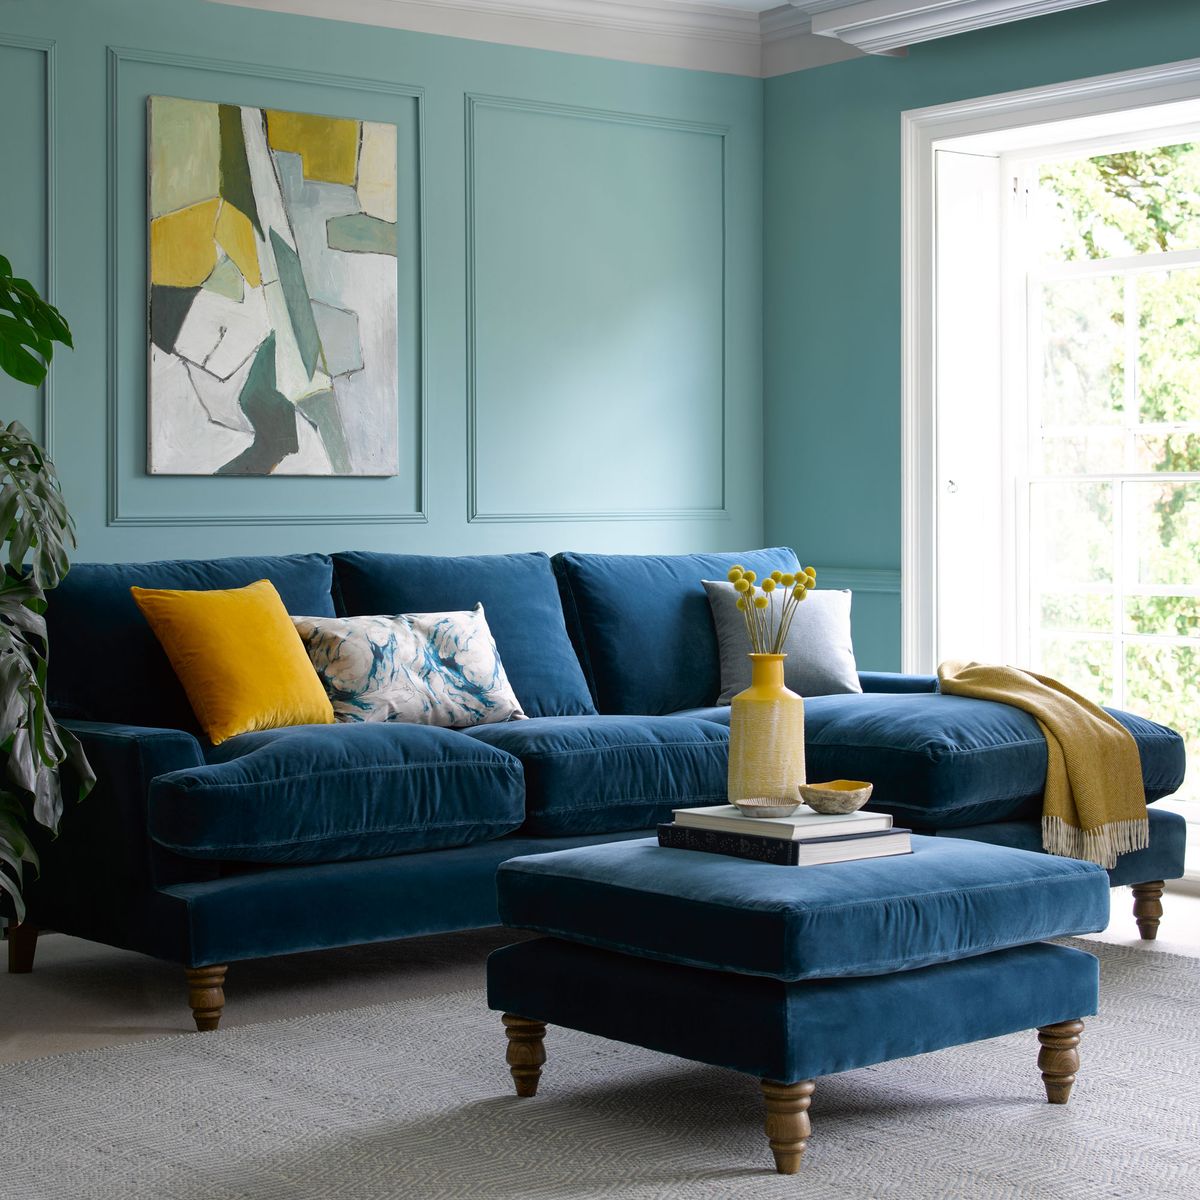 Shopping for a sofa? 5 deciding factors to help you find ‘the one’